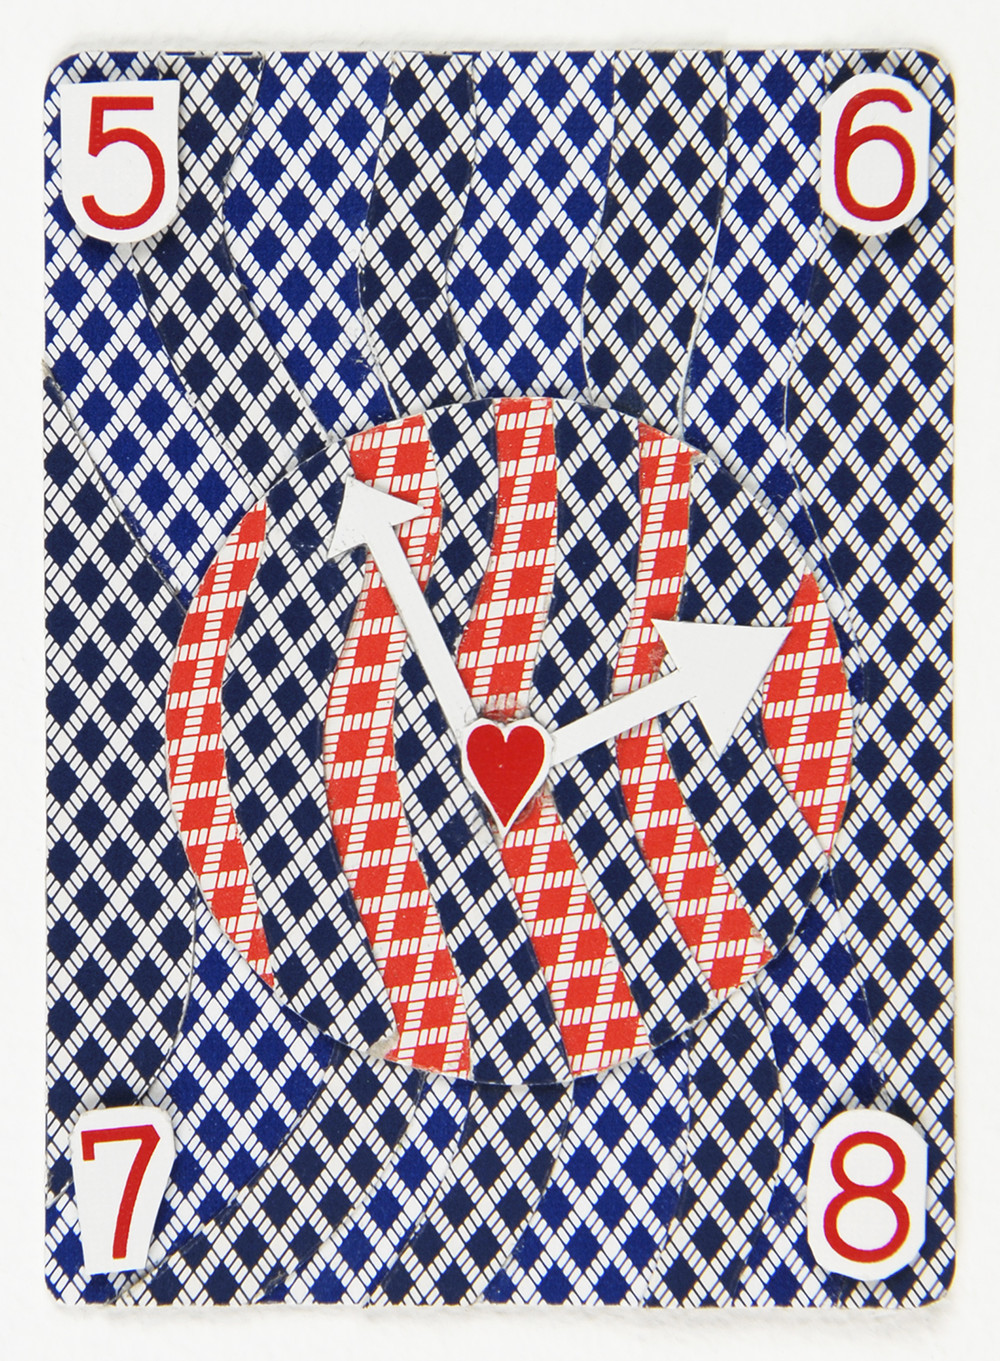  Dealer's Choice playing cards, mat board